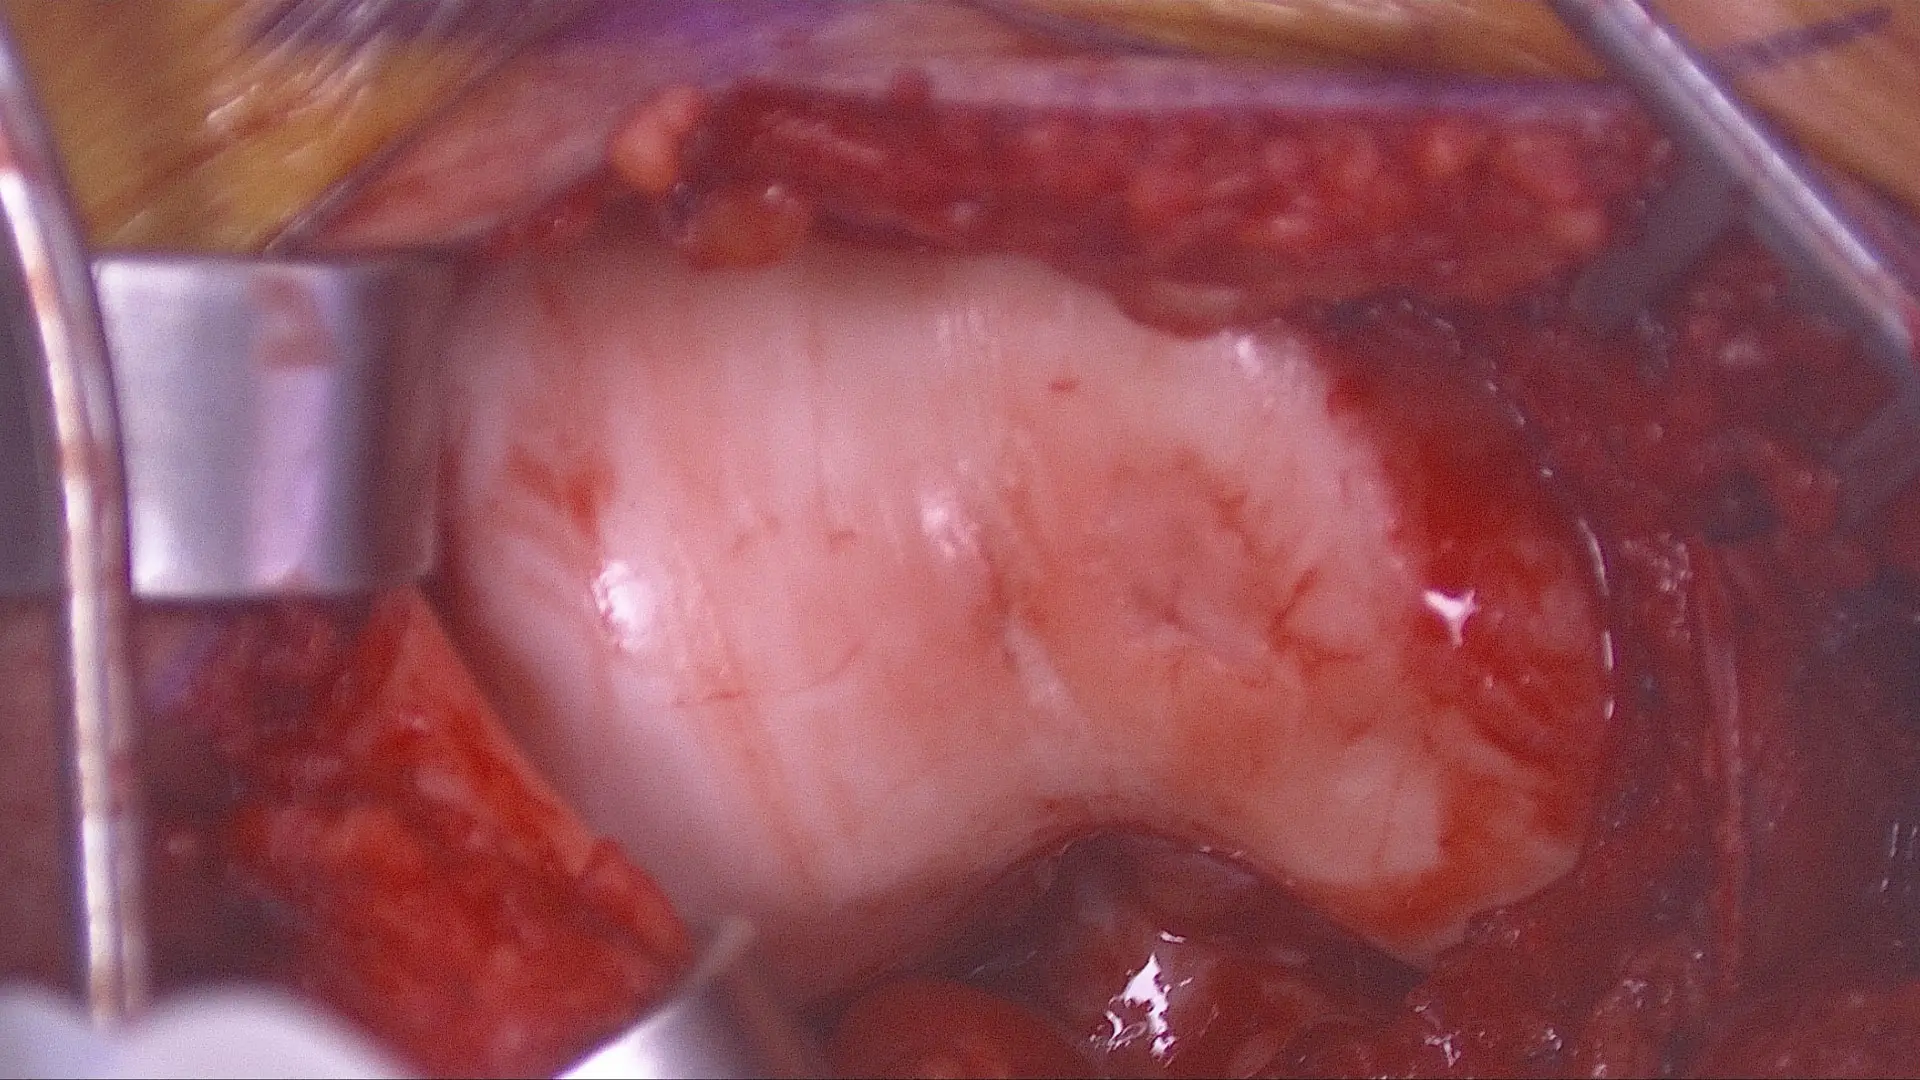 Cartilage damage on the end of the trochlea through which the kneecap (patella) glides when the knee bends and extends.